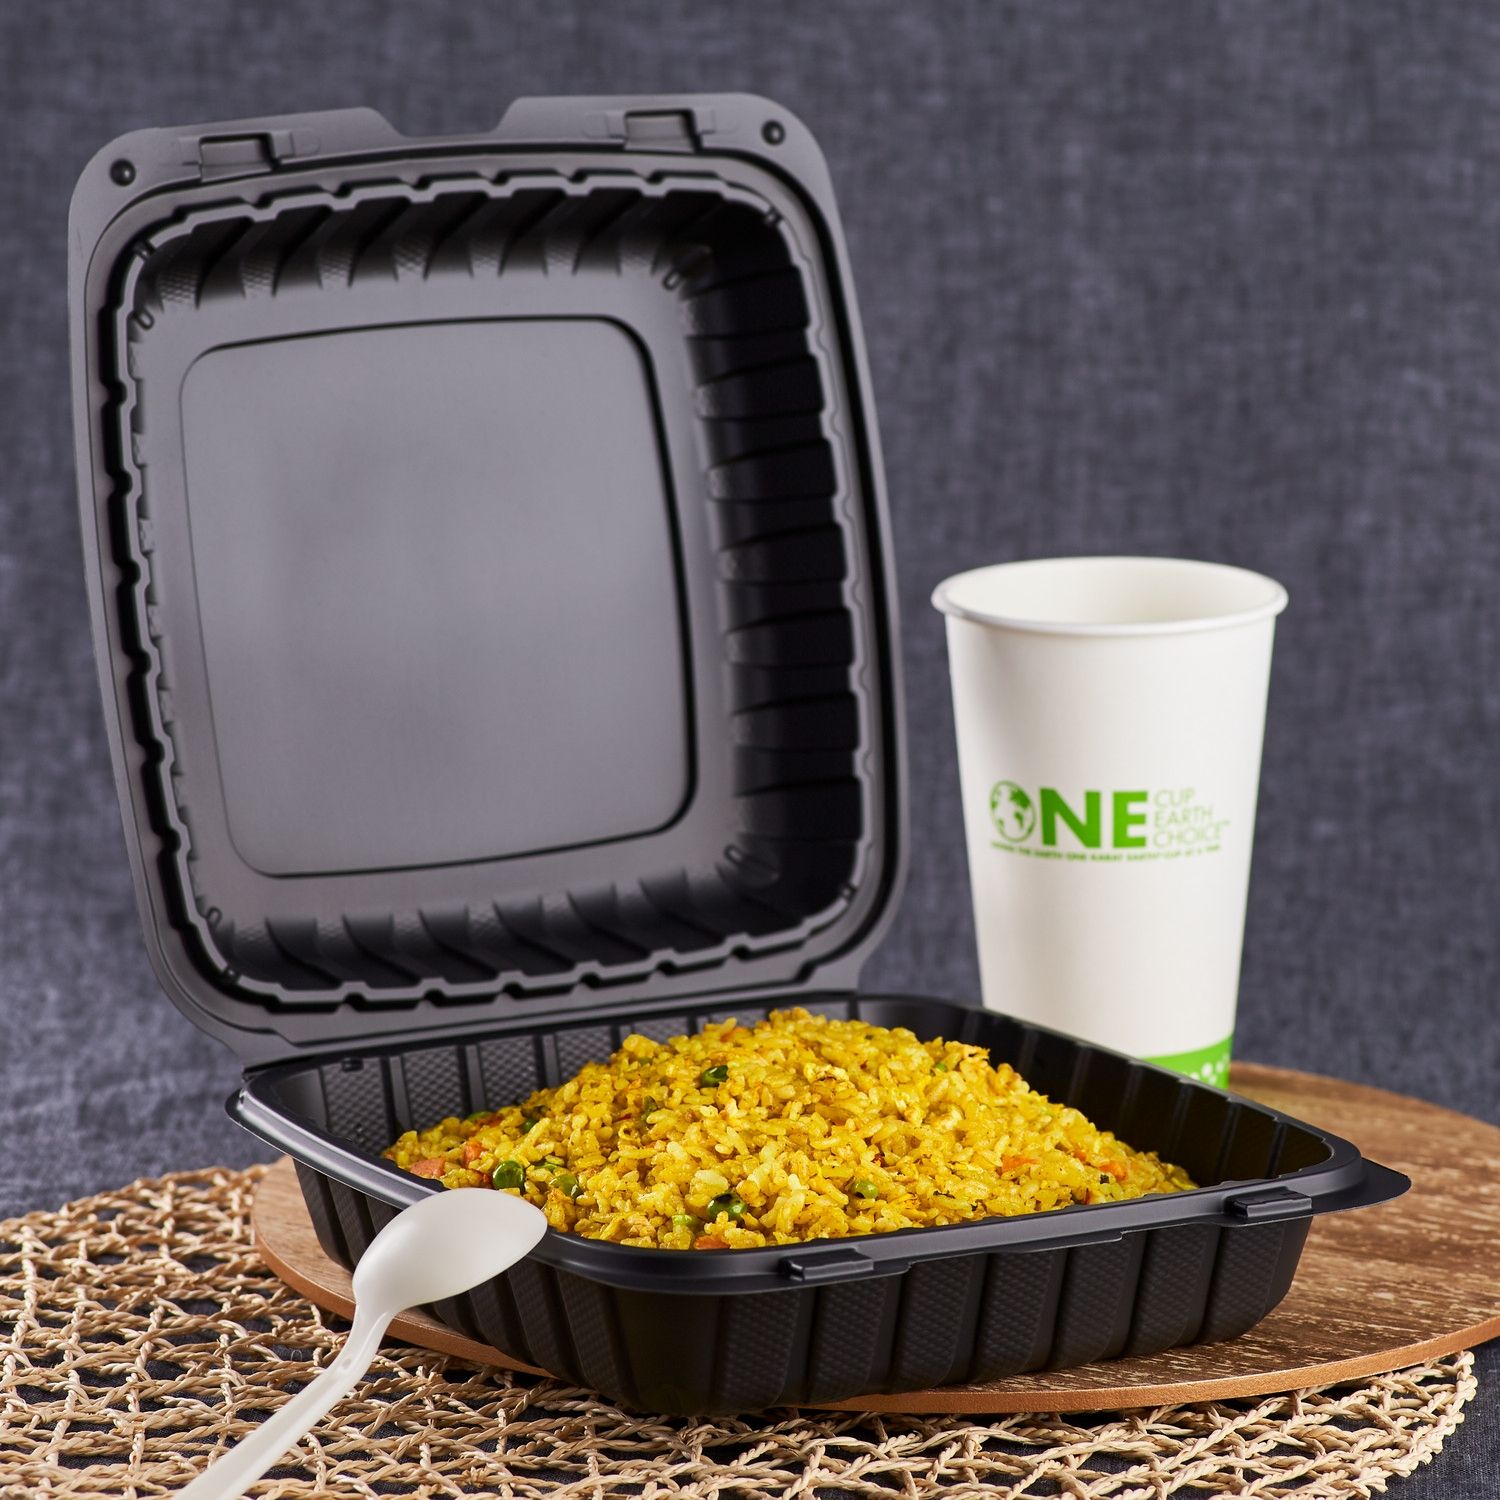 Restaurantware Thermo Tek 9 x 6 x 3 inch Mineral-Filled Take Out Containers, 100 Durable to Go Containers - Heavy-Duty, Disposable, Black Plastic